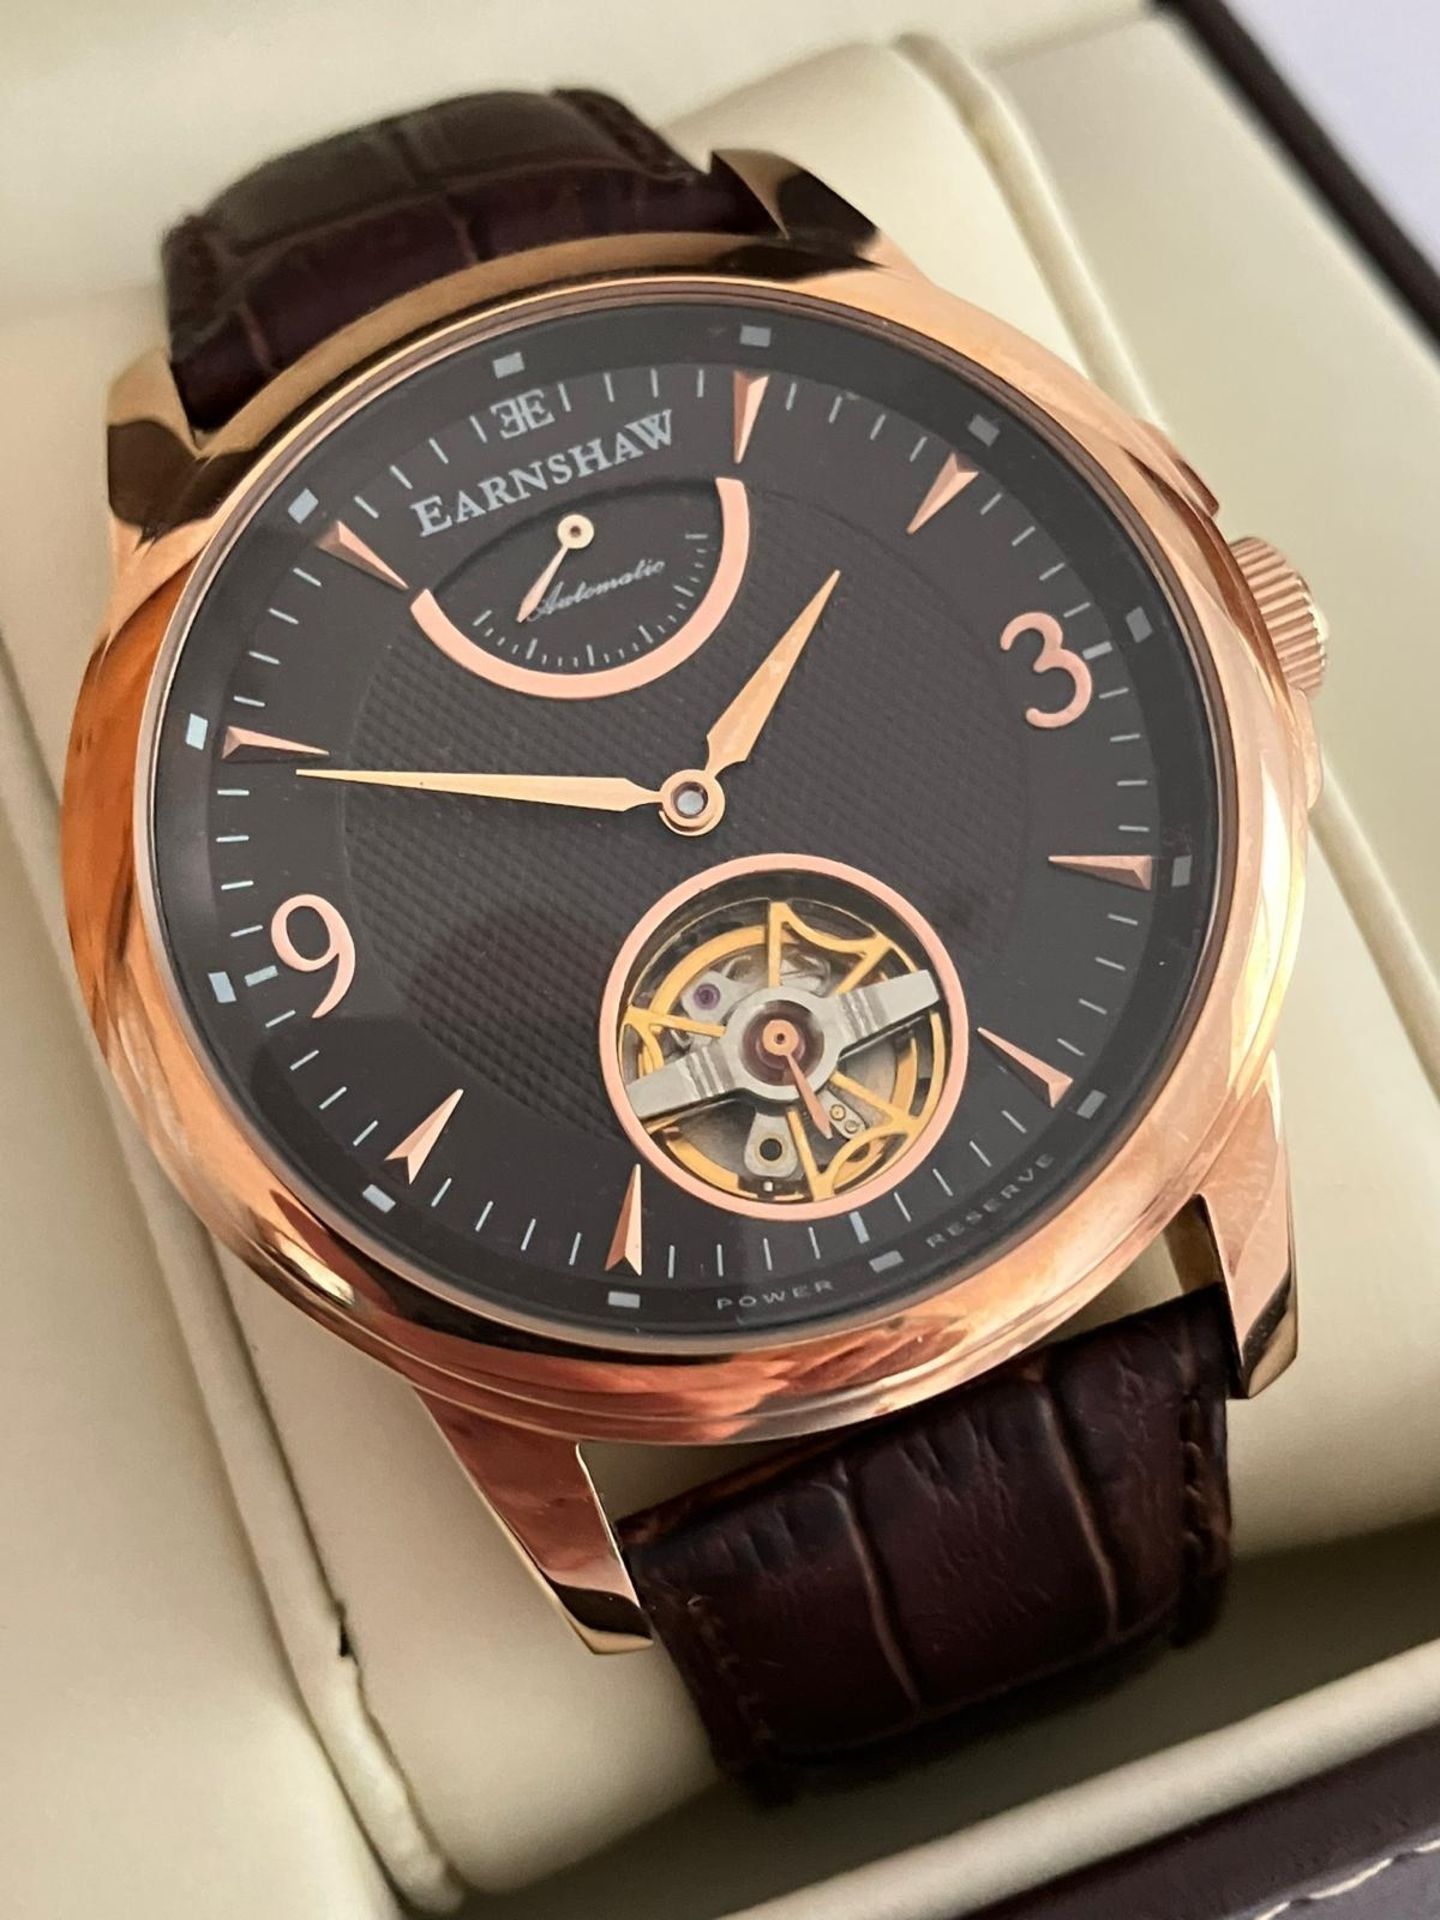 Gentlemans THOMAS EARNSHAW SKELETON WRISTWATCH WB120589. Finished in rose gold tone over stainless